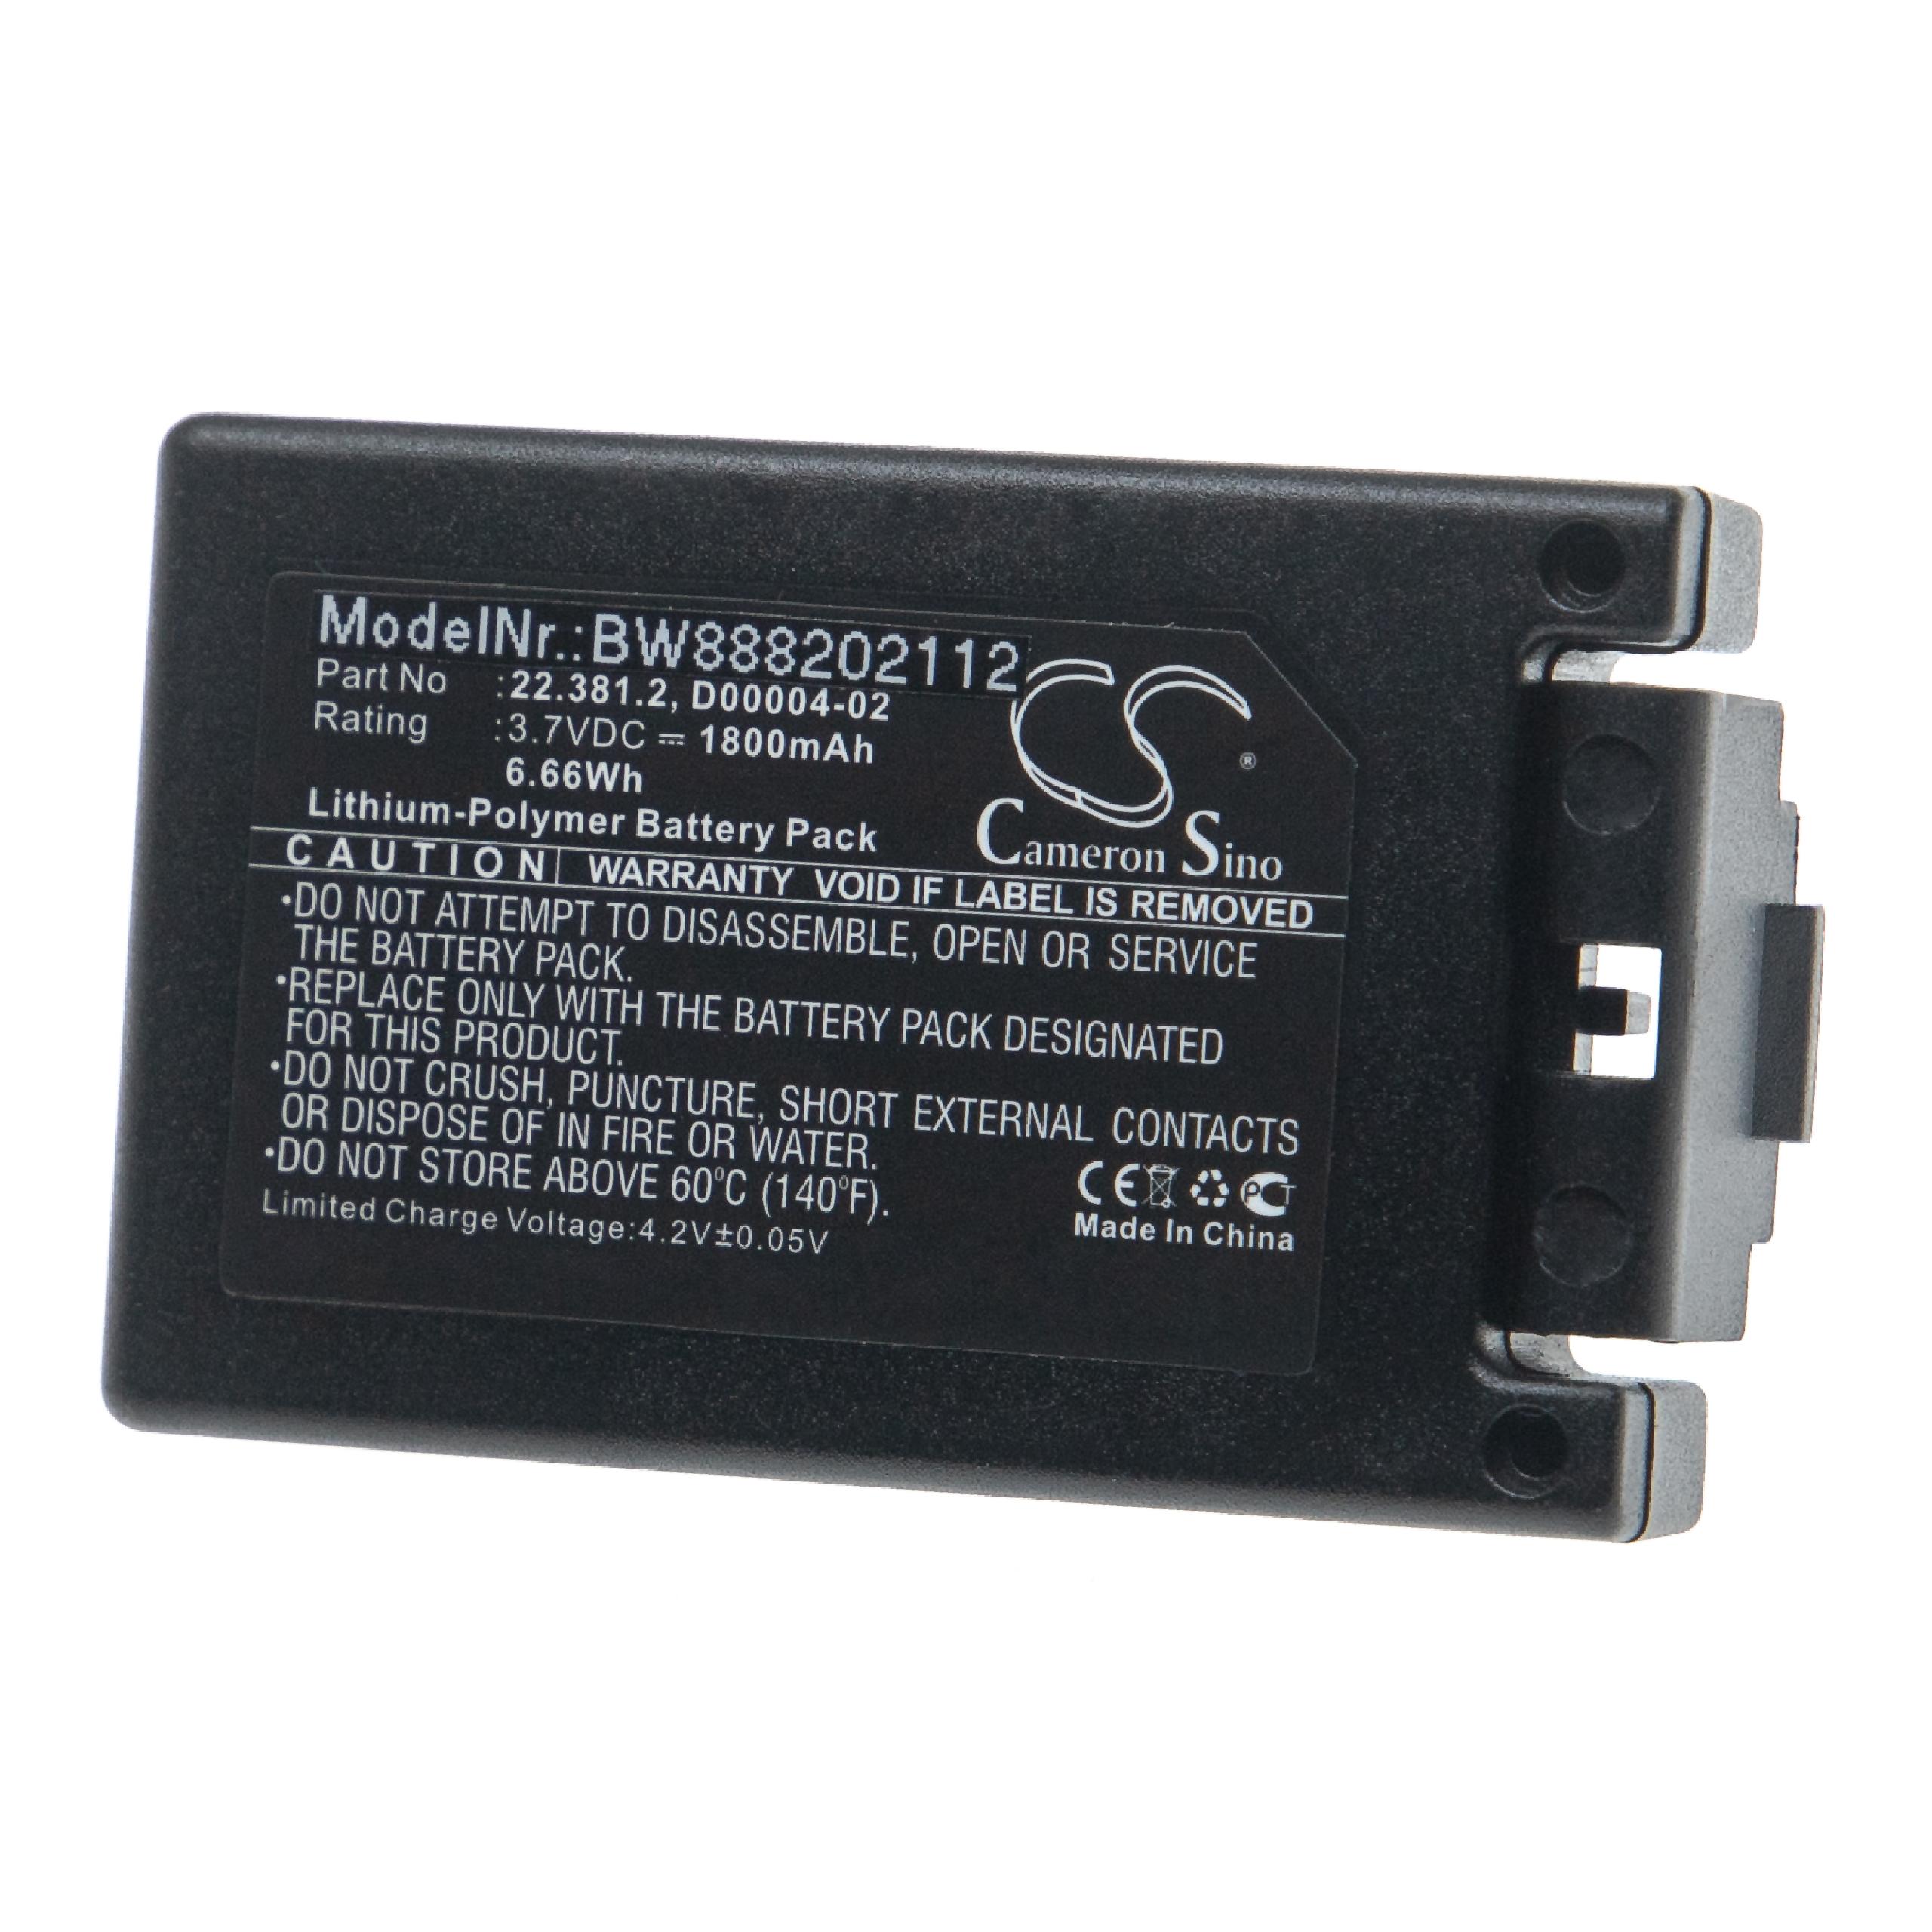 Industrial Remote Control Battery Replacement for Teleradio 22.381.2, D00004-02 - 1800mAh 3.7V Li-polymer